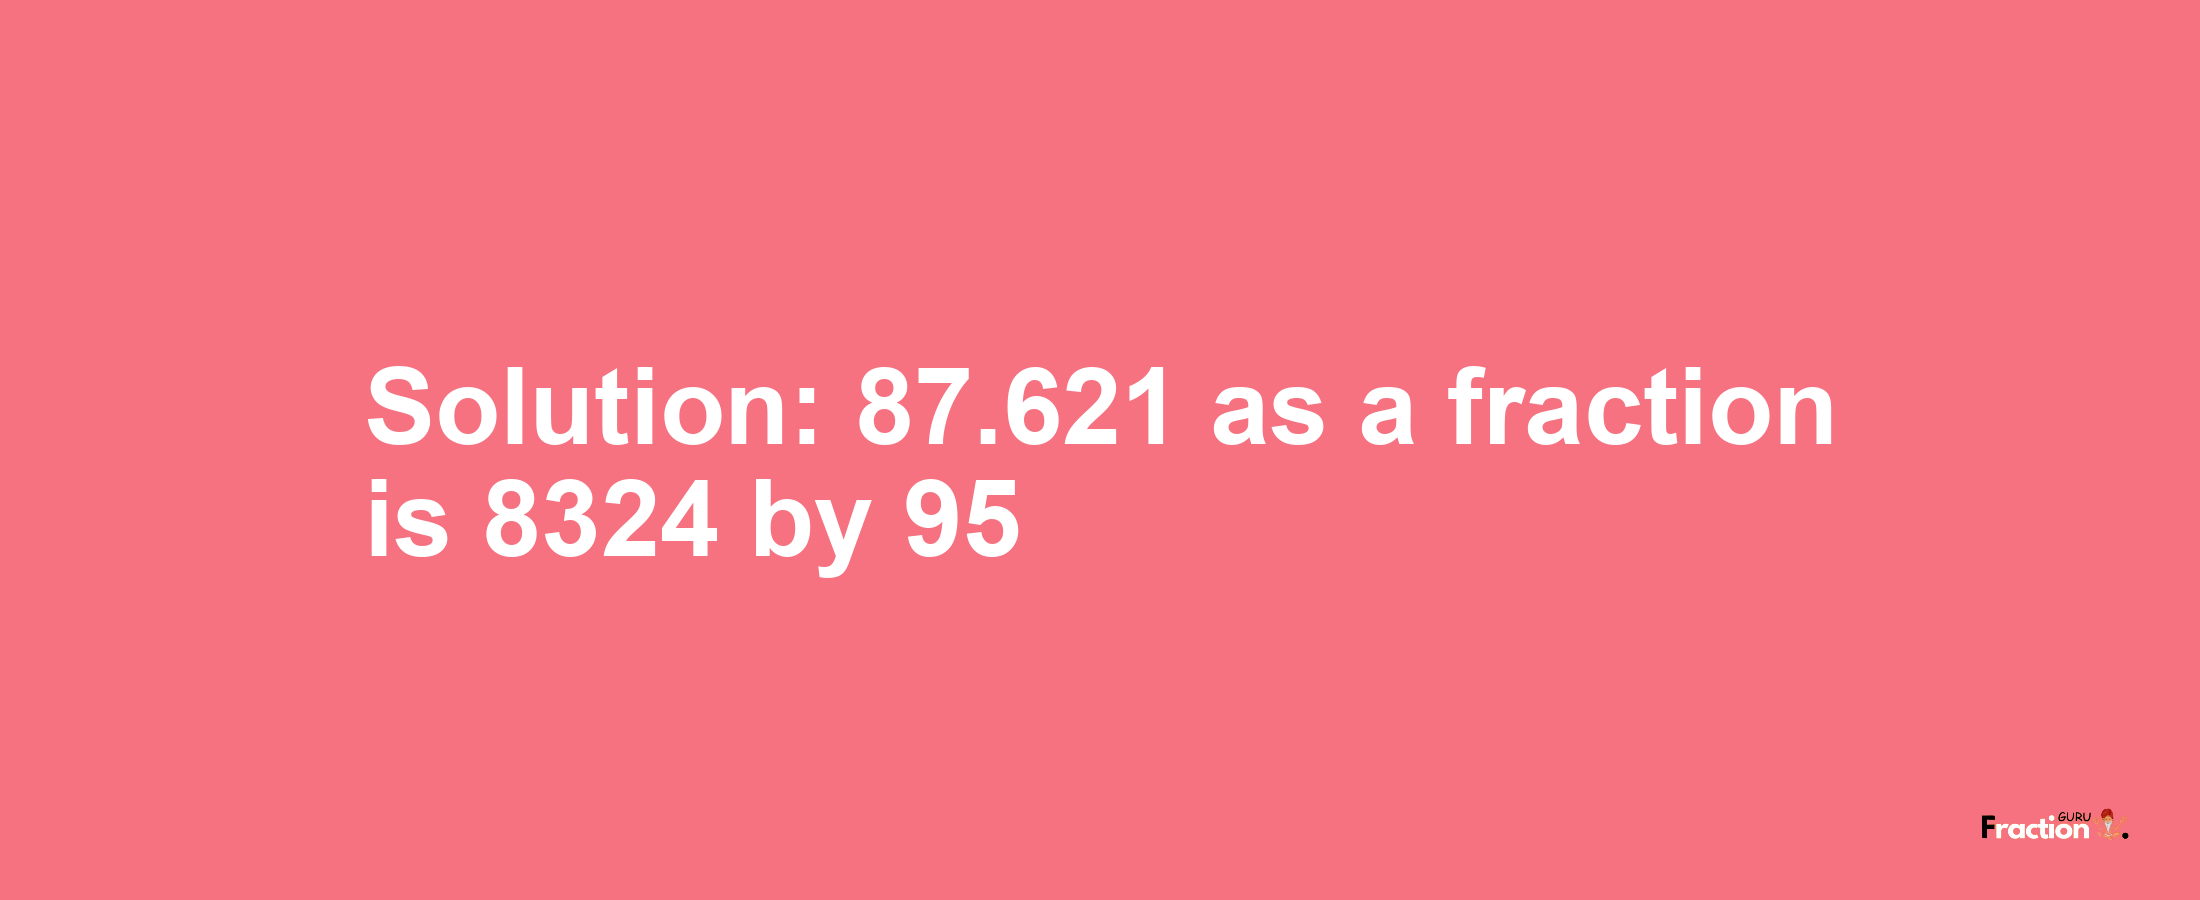 Solution:87.621 as a fraction is 8324/95